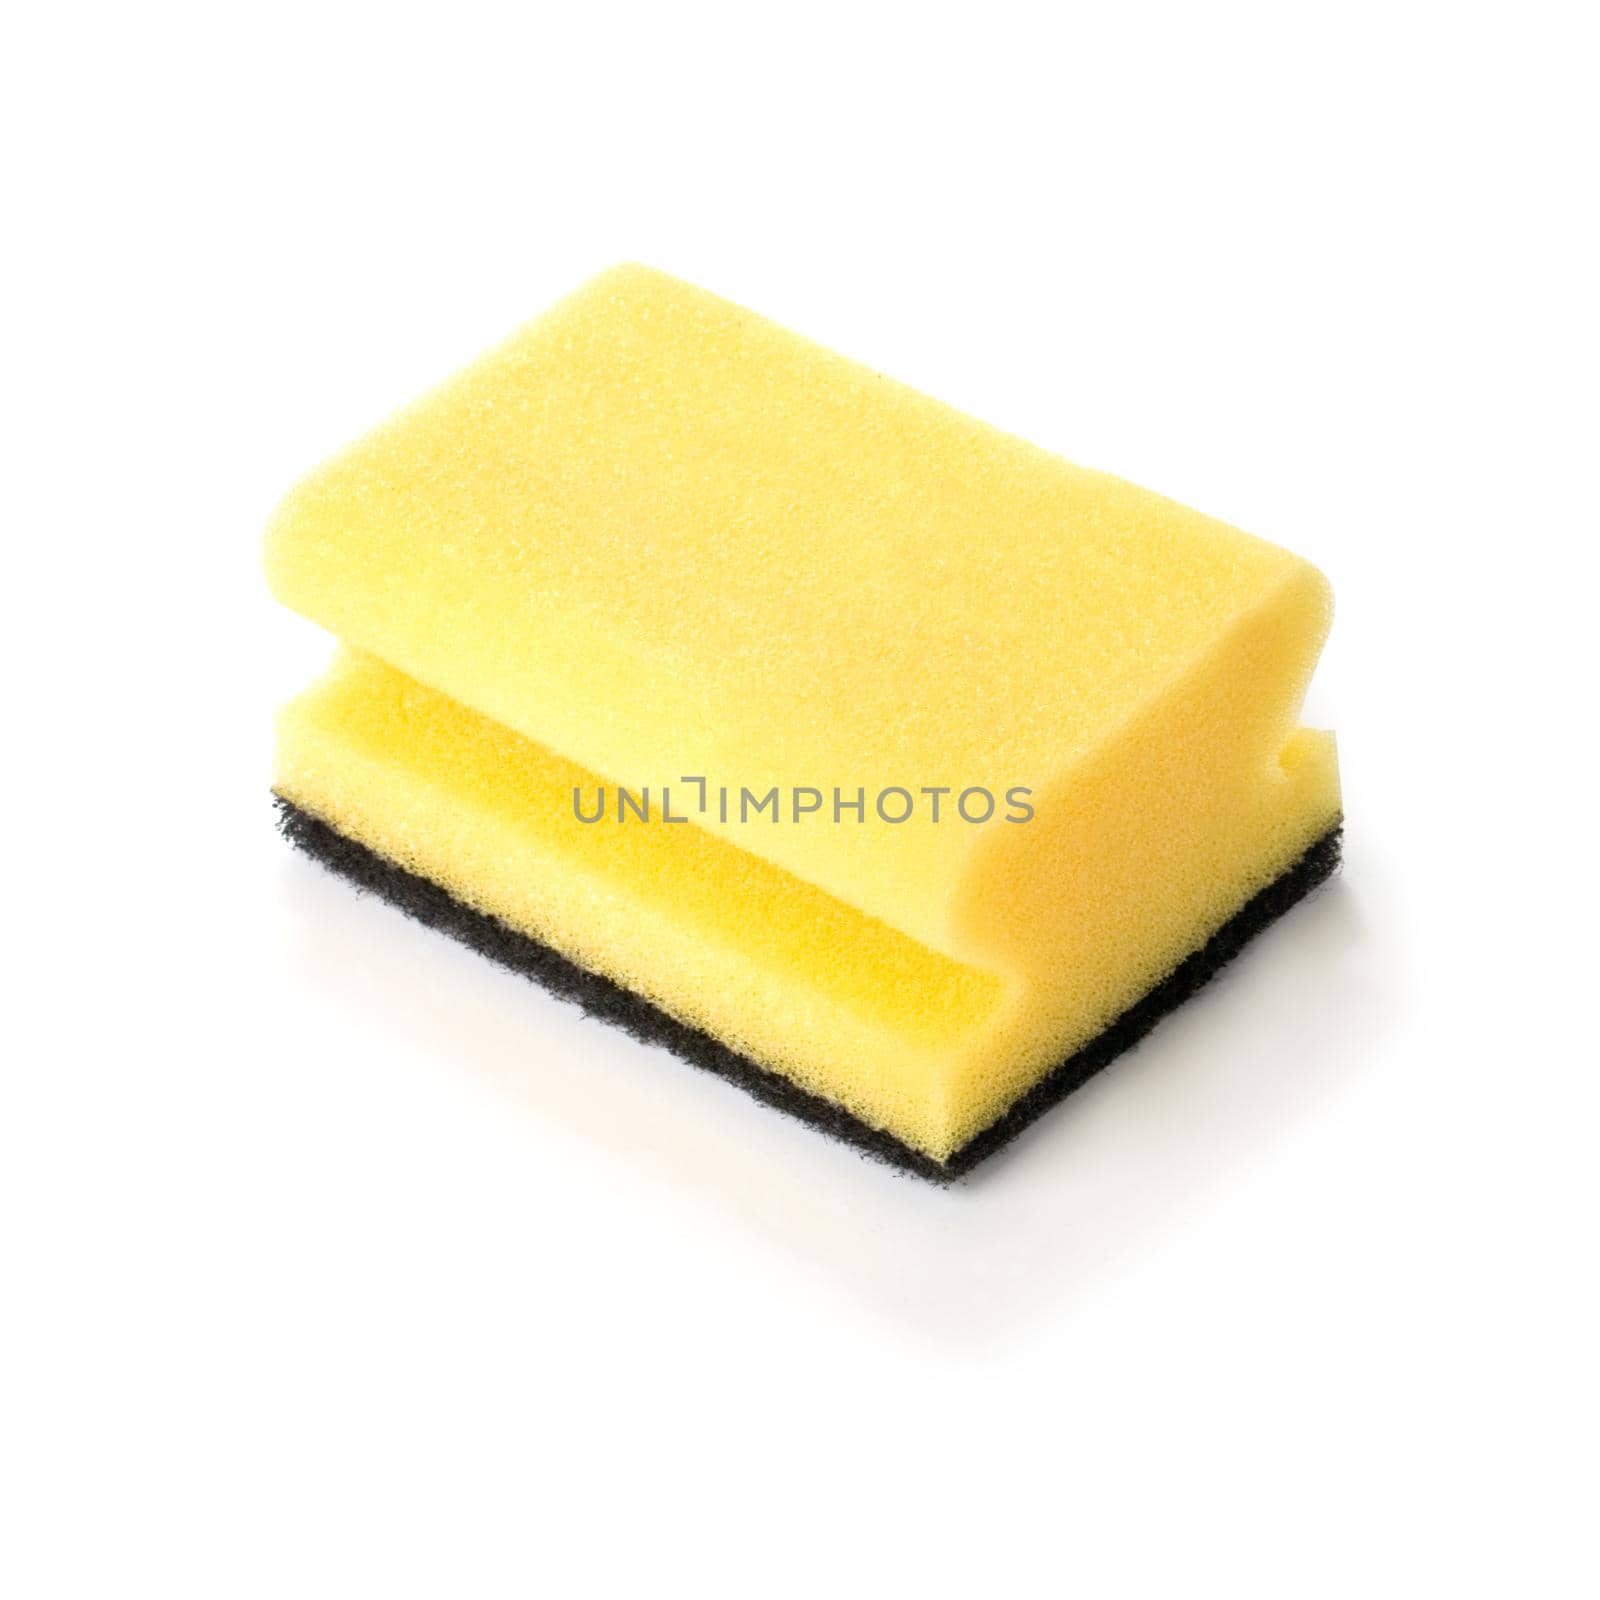 yellow household sponge on a white background